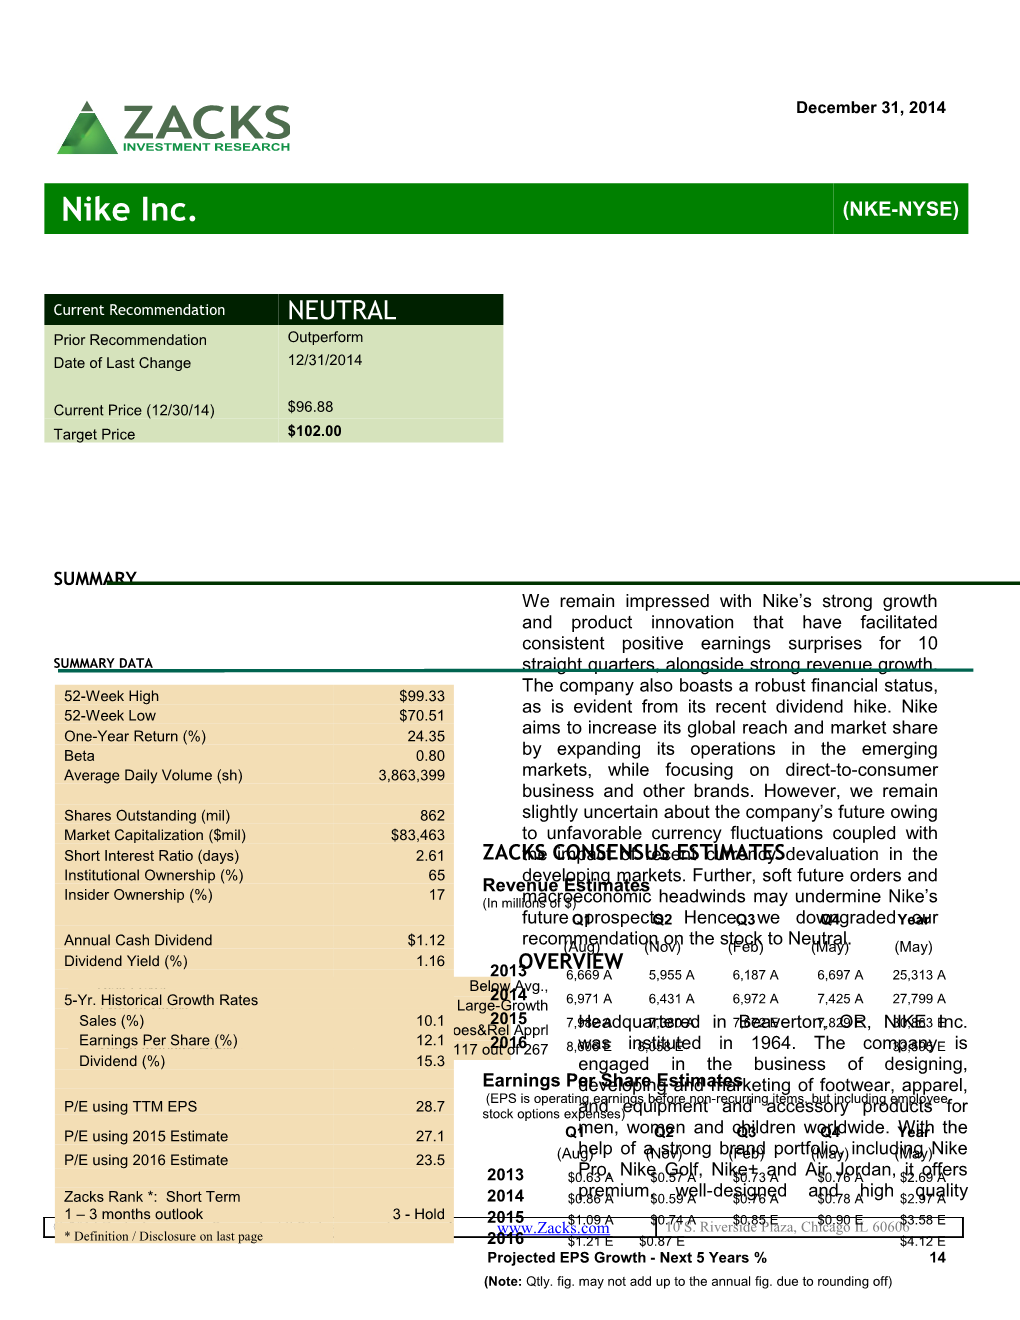 Headquartered in Beaverton, OR, NIKE Inc. Was Instituted in 1964. the Company Is Engaged